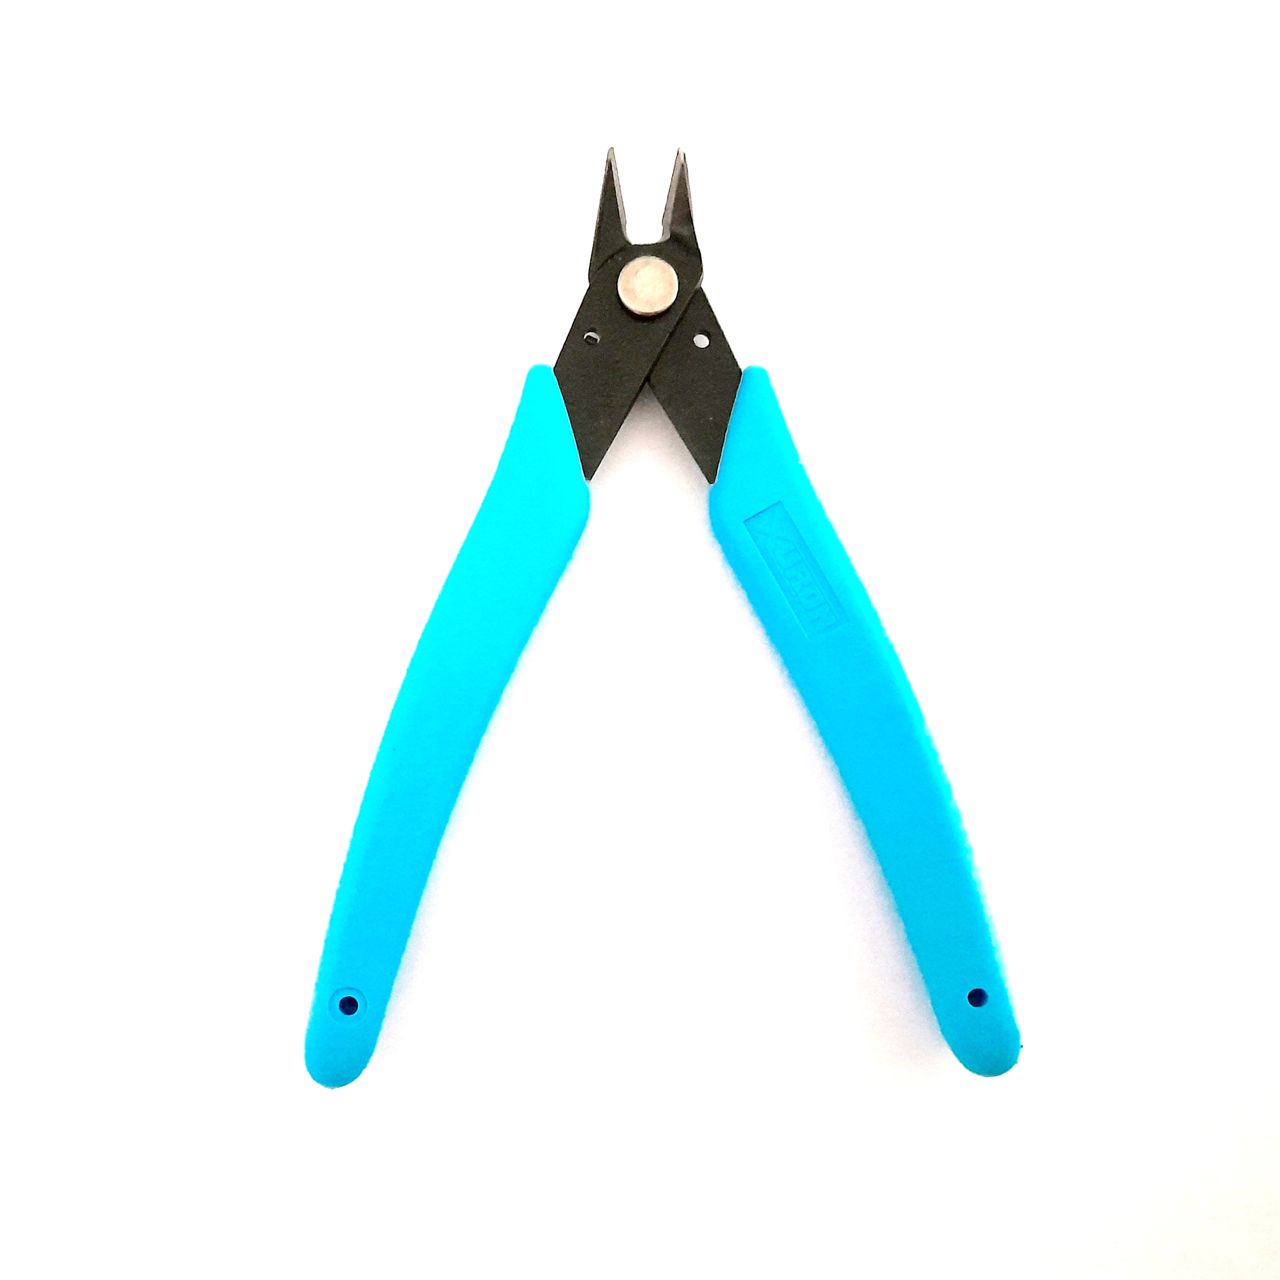 Beaders Jewellery Tool Micro Shear Flush Cutter Jewellery Making Plier by Bead Smith